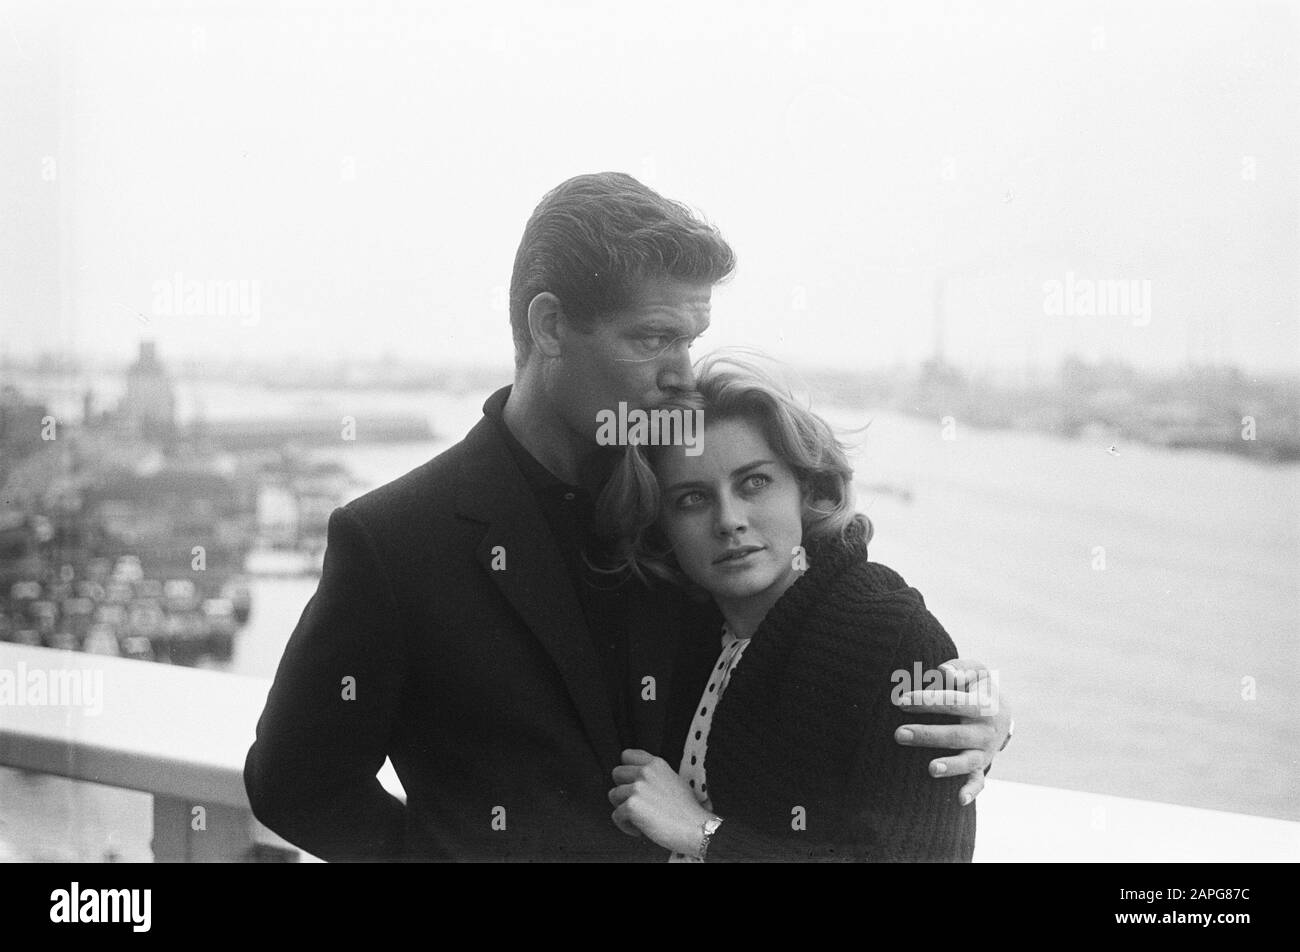 Cocktail Party Stephen Boyd E Dolores Hart. Stephen Boyd E Dolores Heart Data: 20 Giugno 1961 Nome Personale: Boyd, Stephen, Dolores Heart Foto Stock